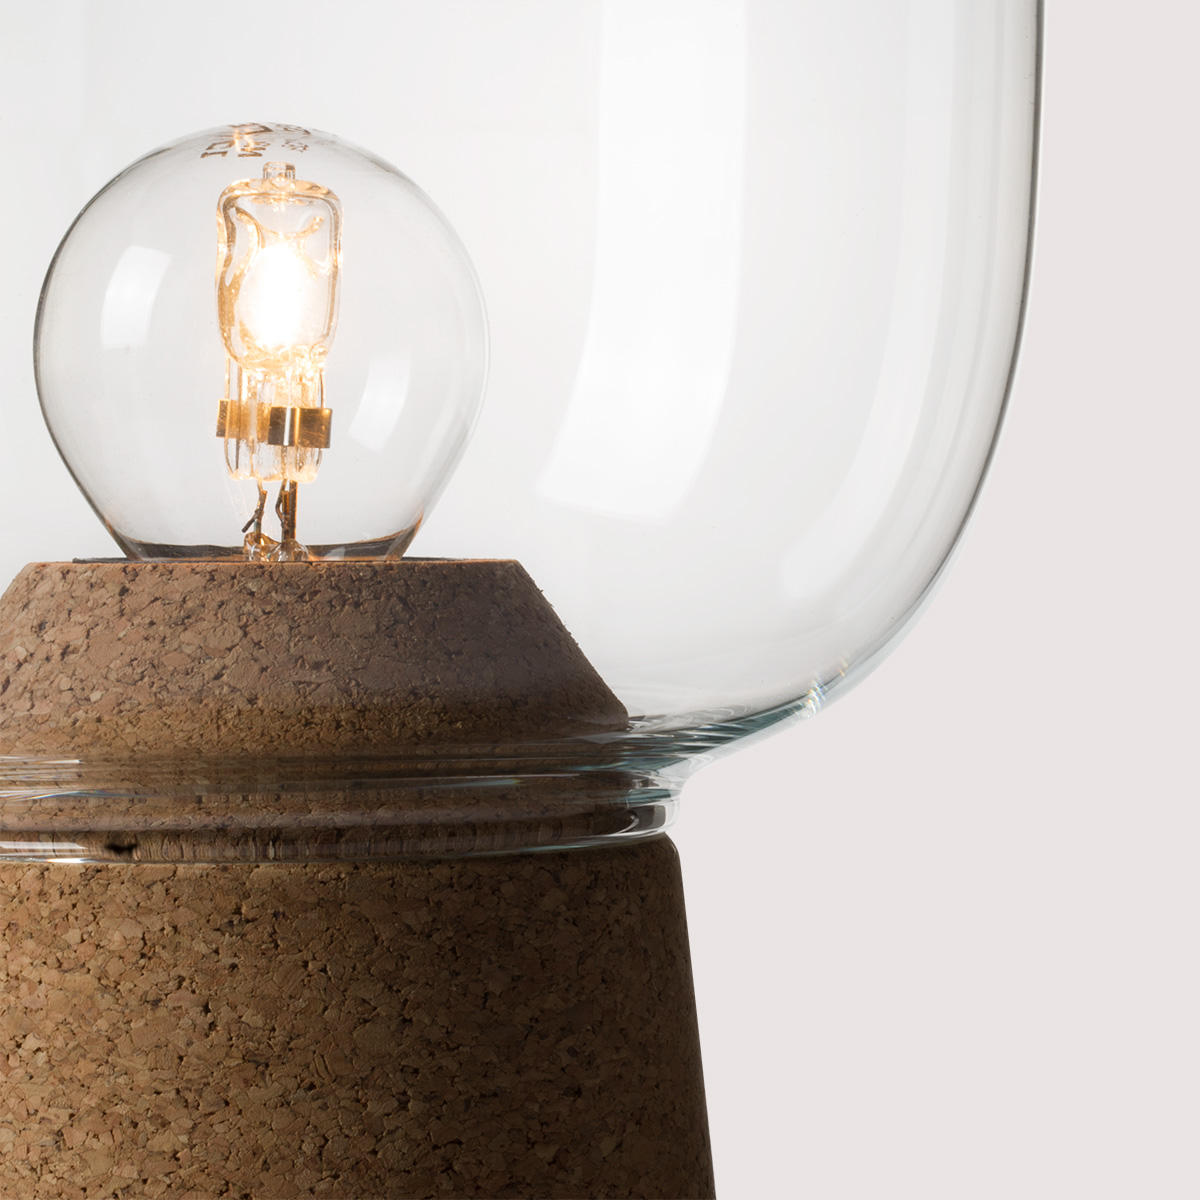 Picia table lamp designed by Enrico Zanolla in clear glass and natural cork, transparent cable, detail of the junction between cork and glass, beautiful match of curves